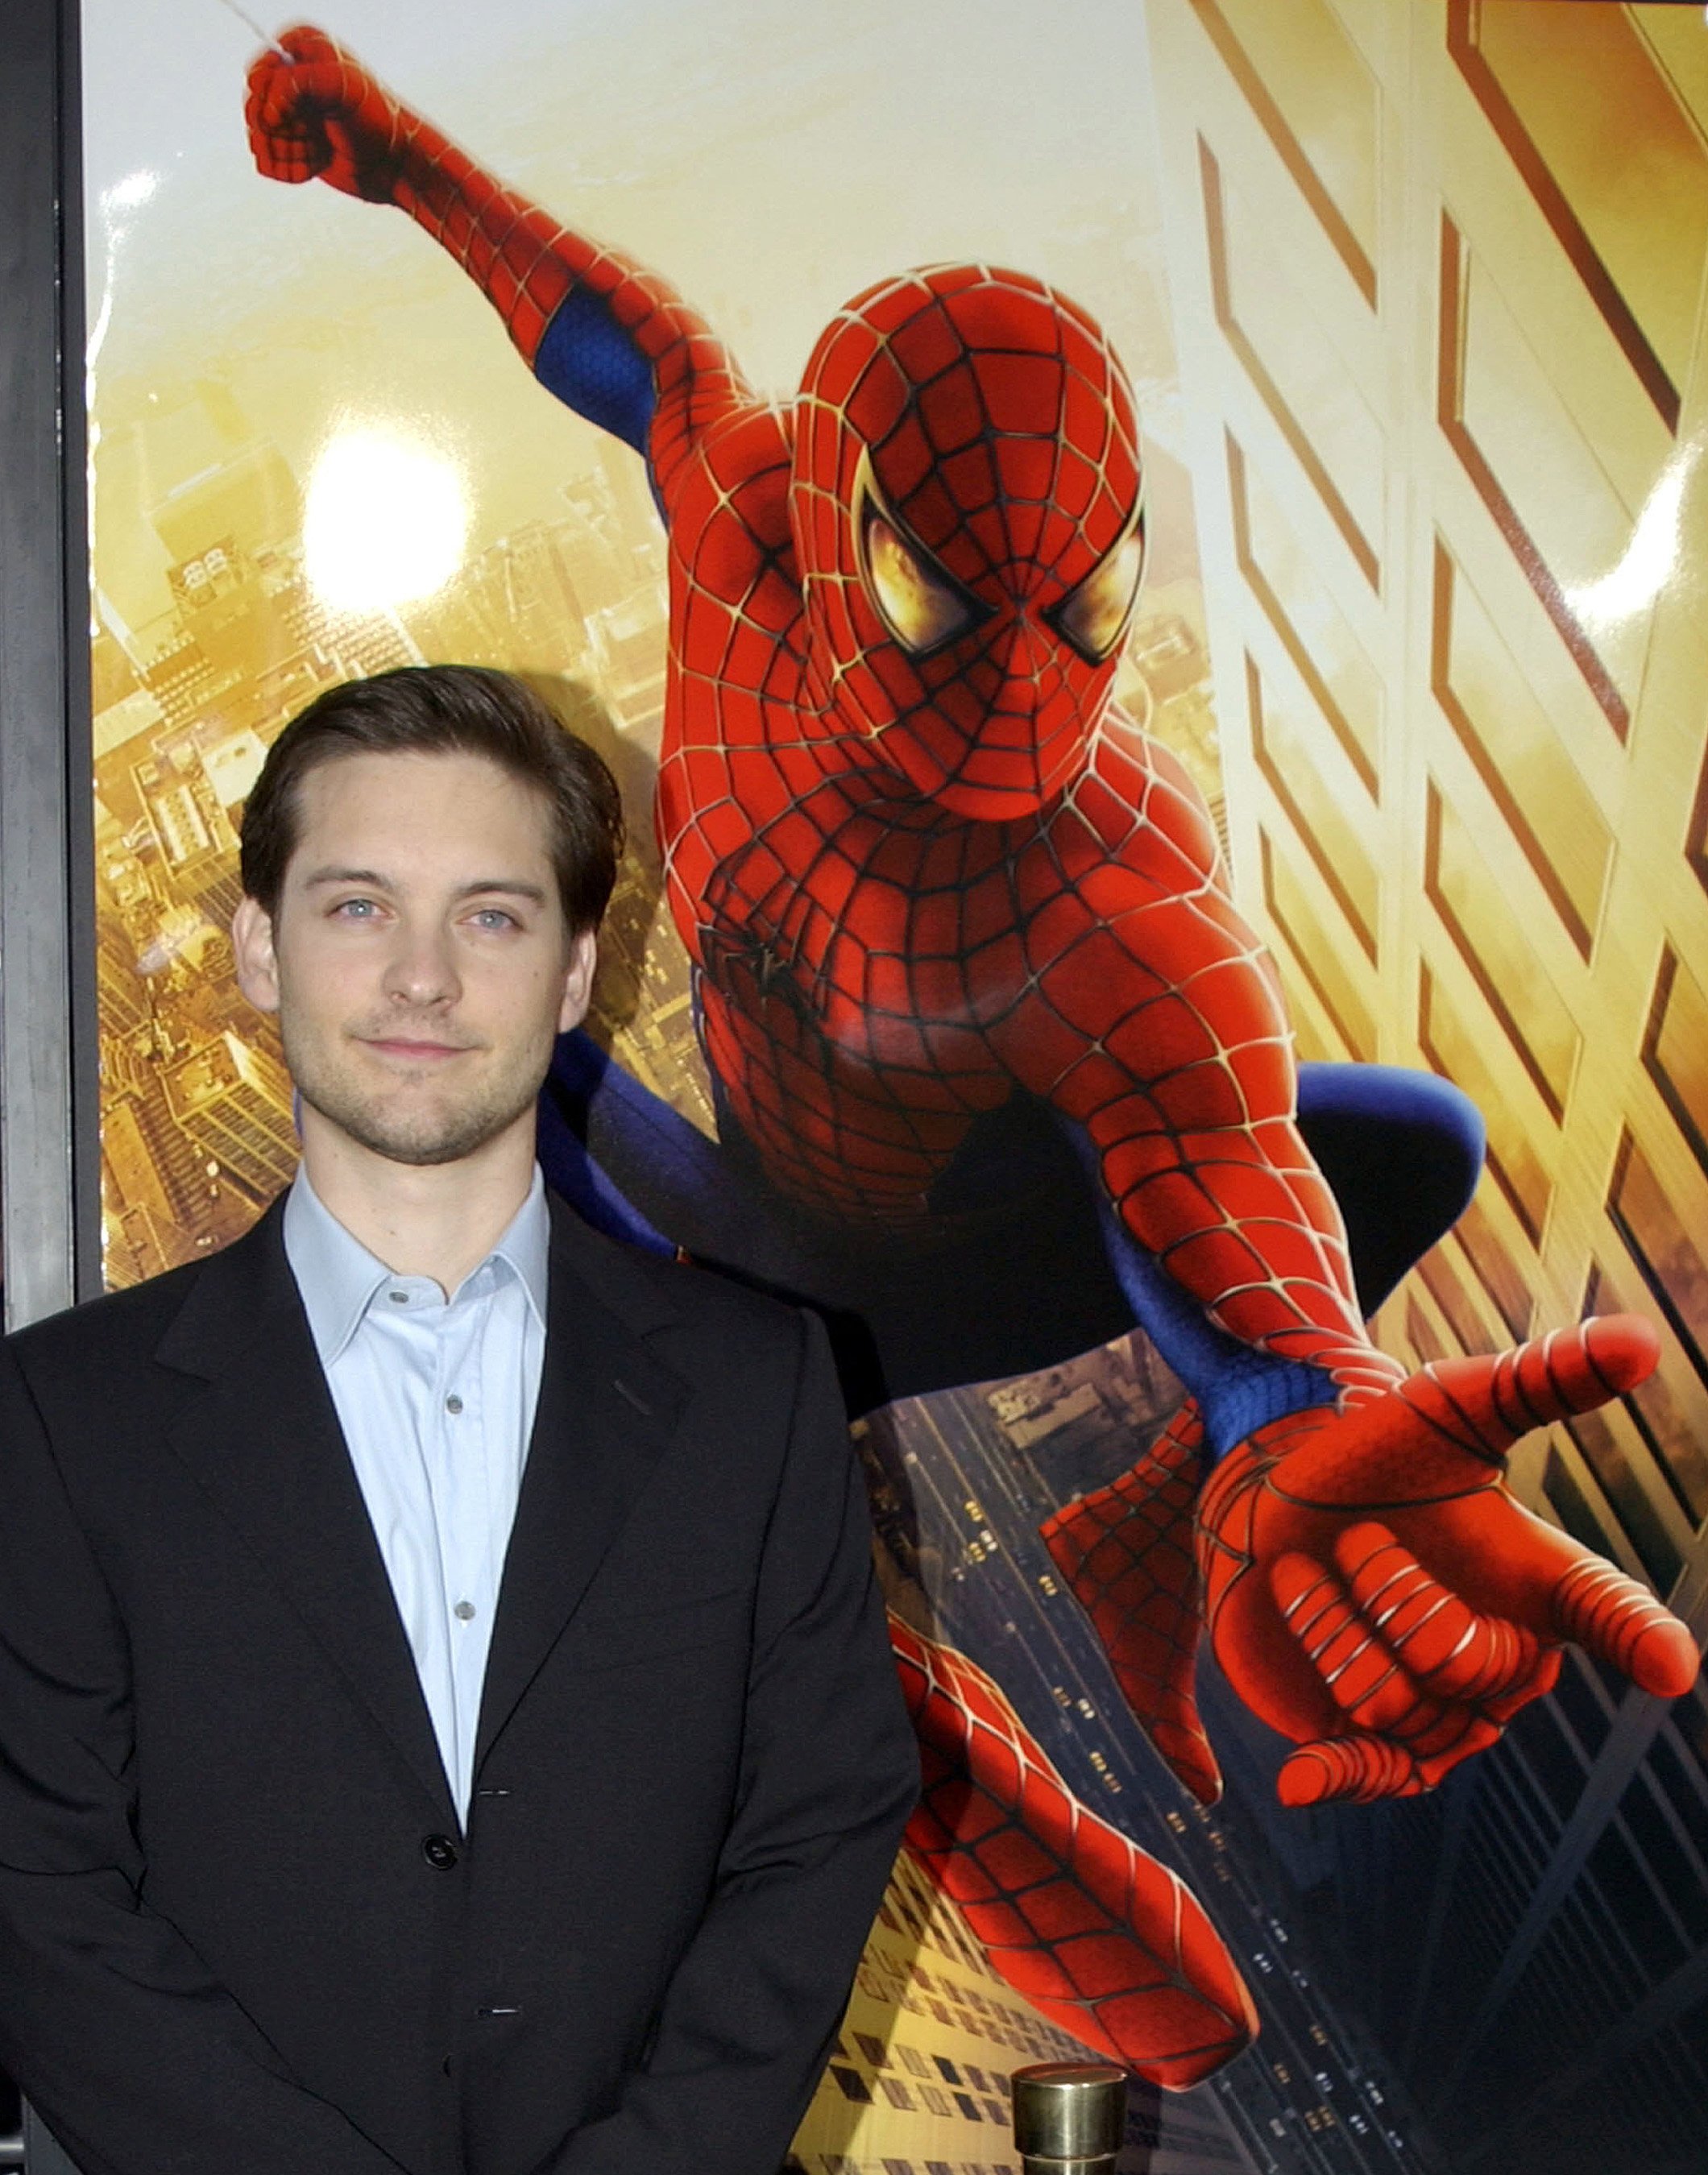 Tobey Maguire at the premier of "Spider-Man" at Mann Village in Westwood, California | Photo: Albert L. Ortega/WireImage via Getty Images